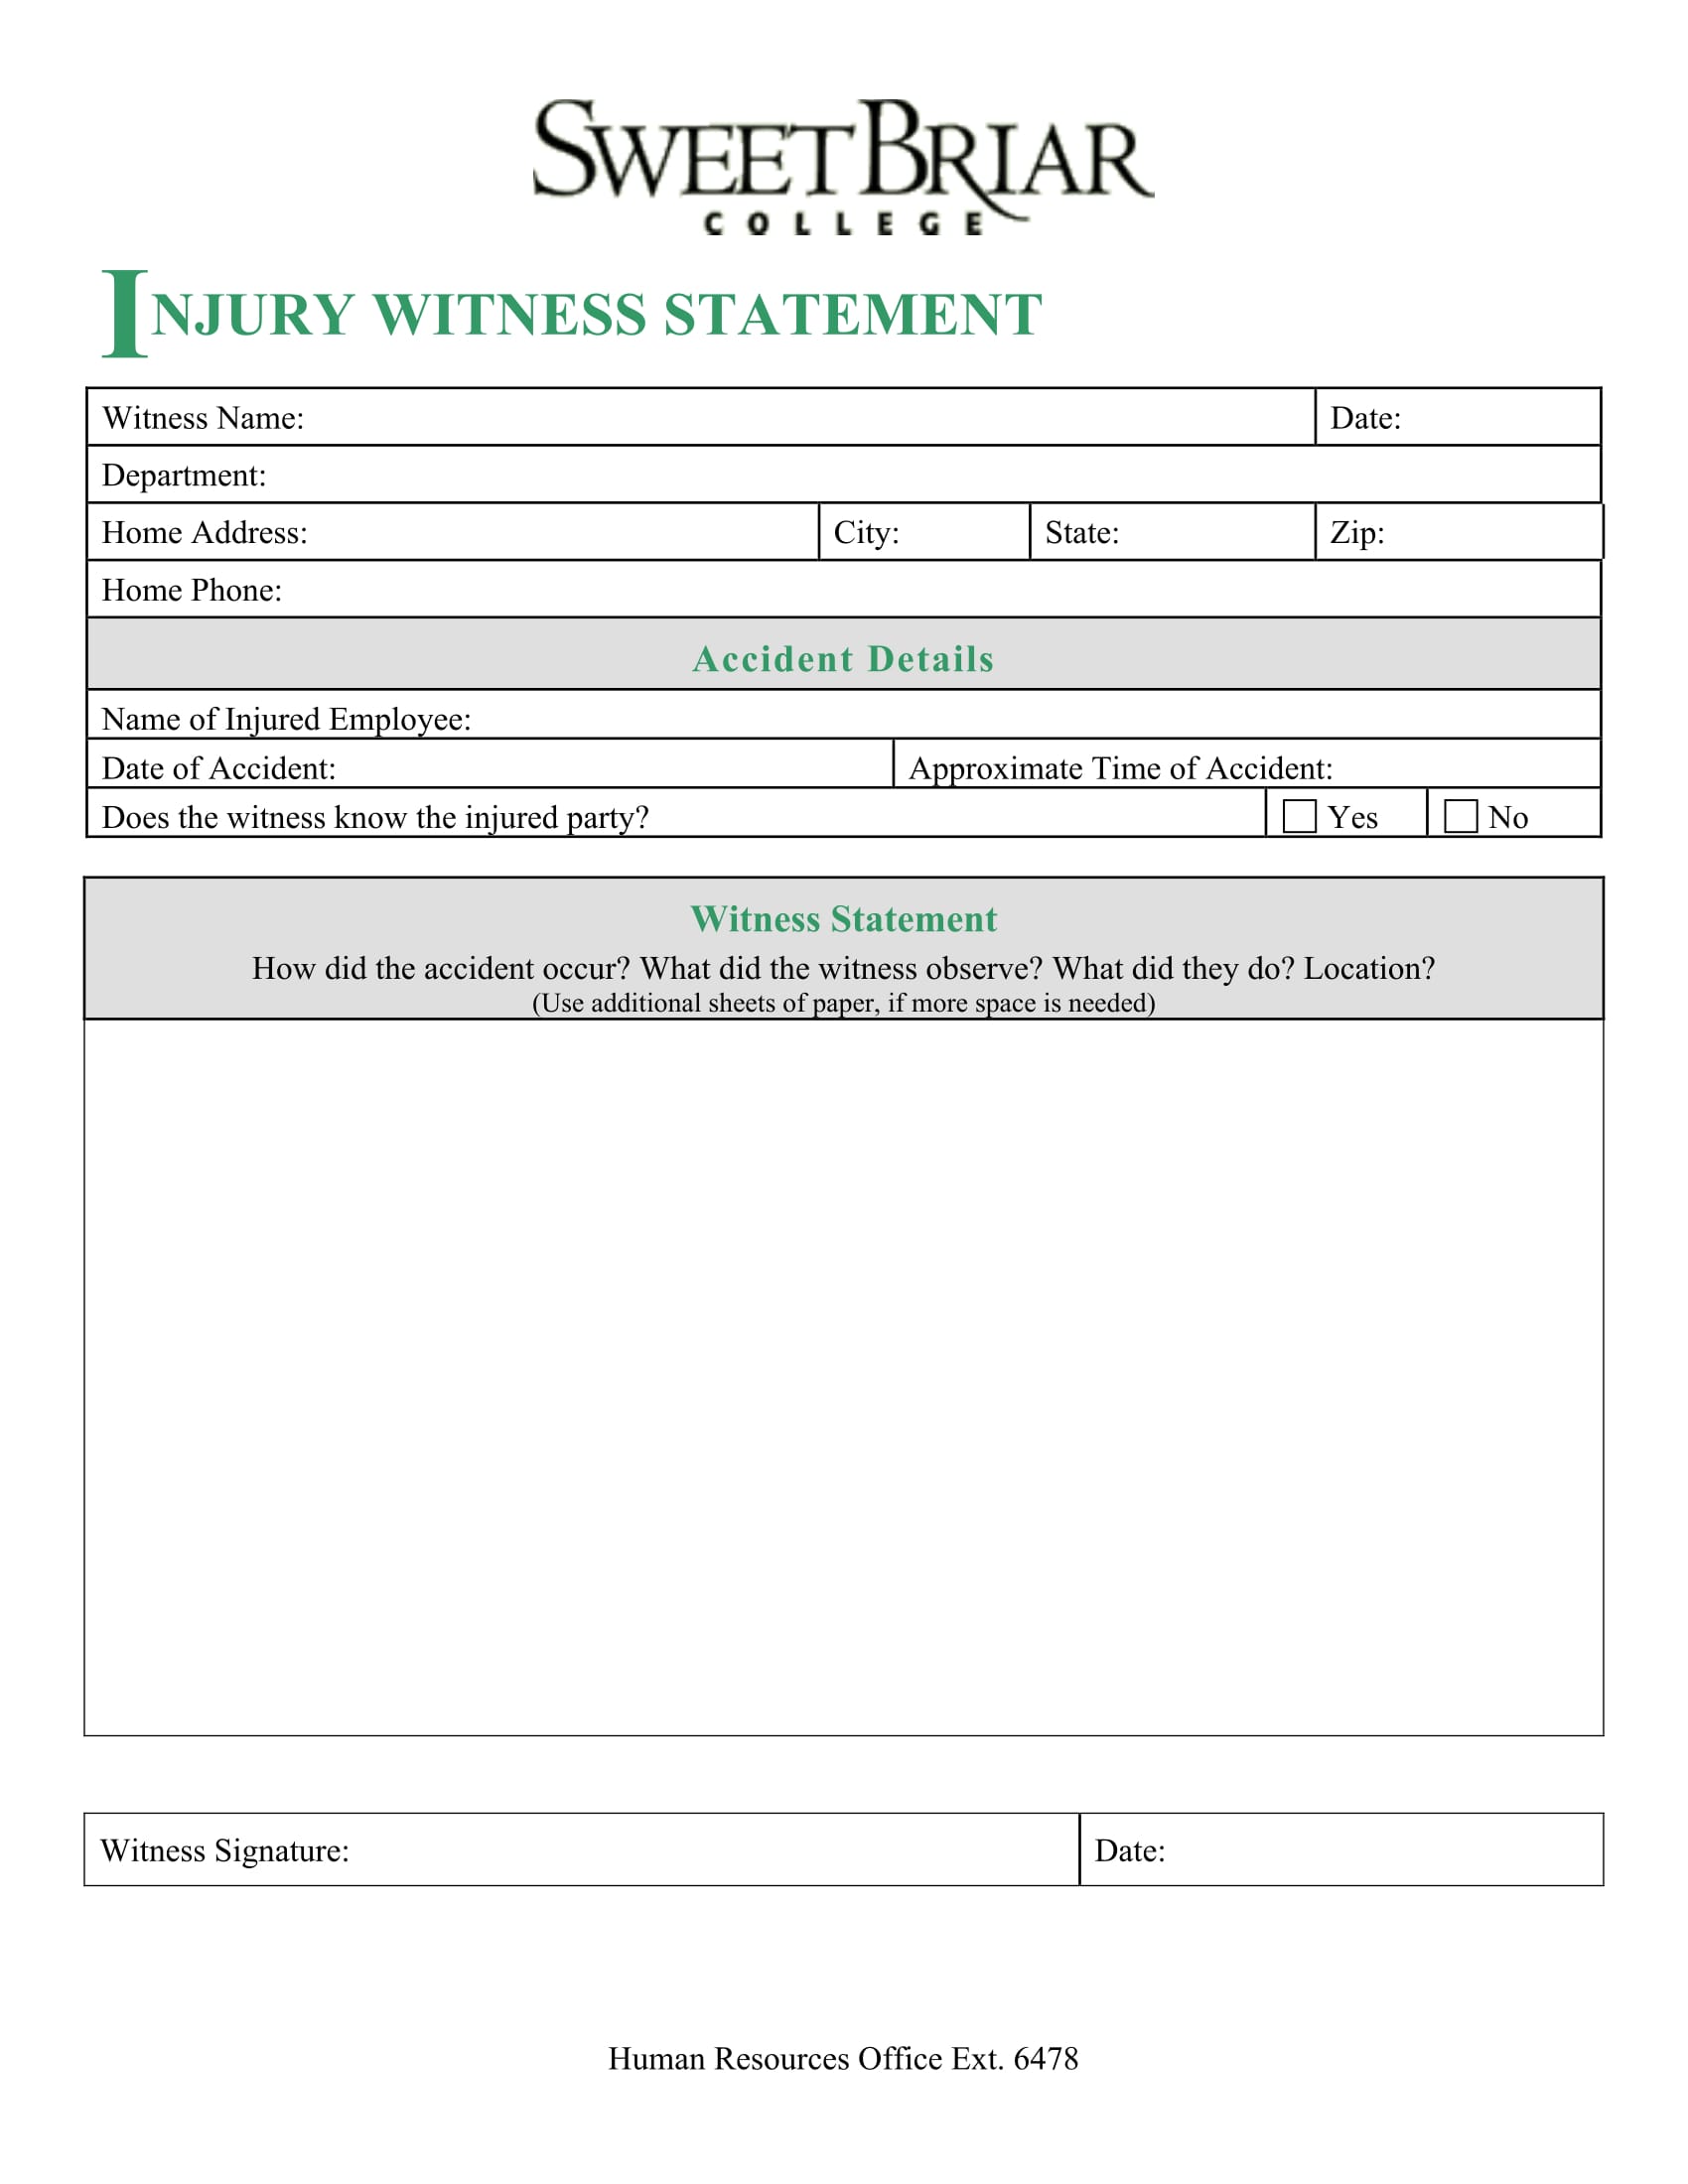 are witness statements discoverable